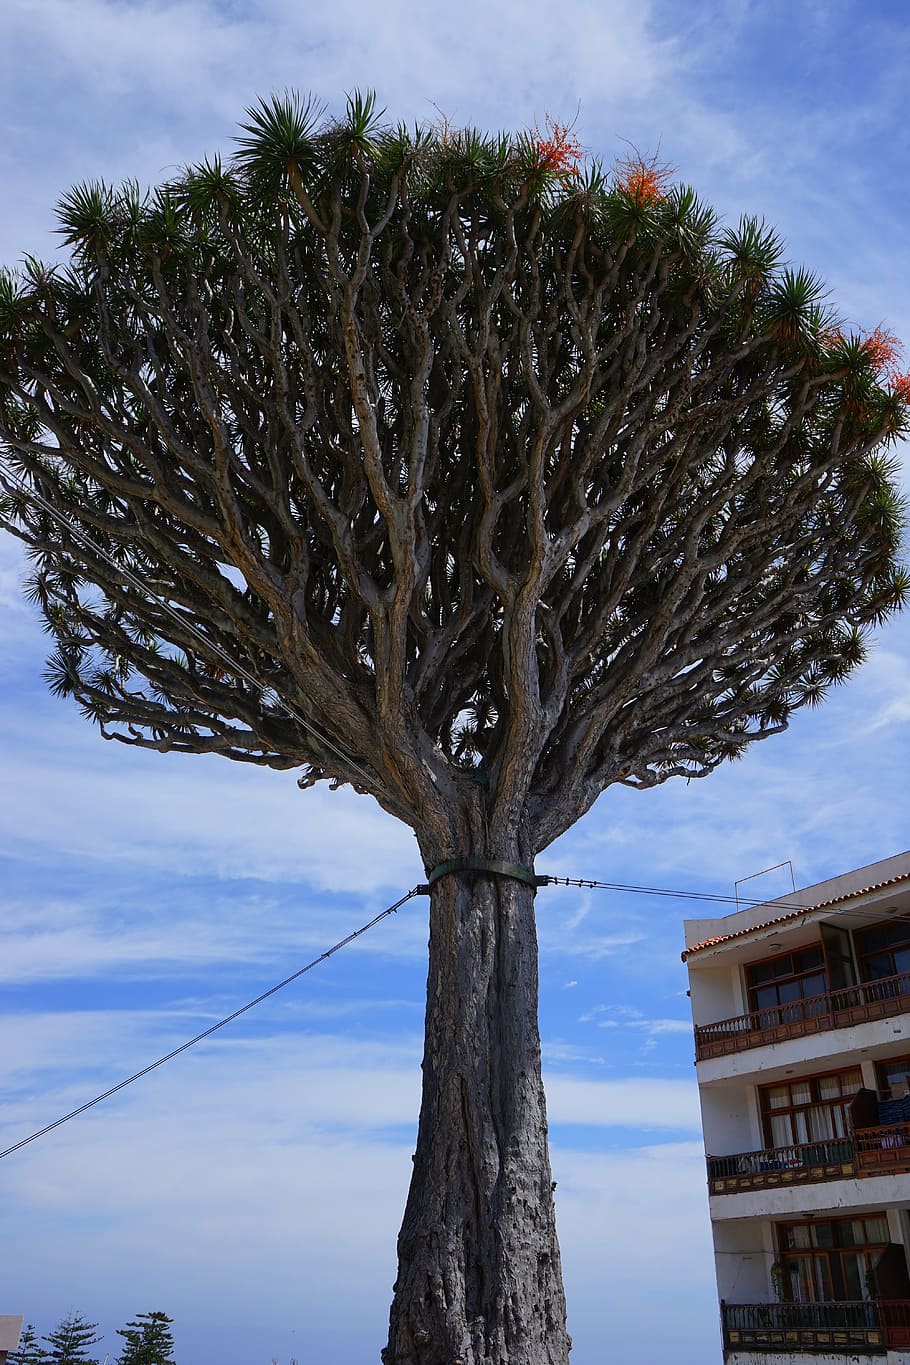 canary island dragon tree, support, tethers, dragon tree, dracaena draco, crown, tree, dracaena, asparagus plant, asparagaceae